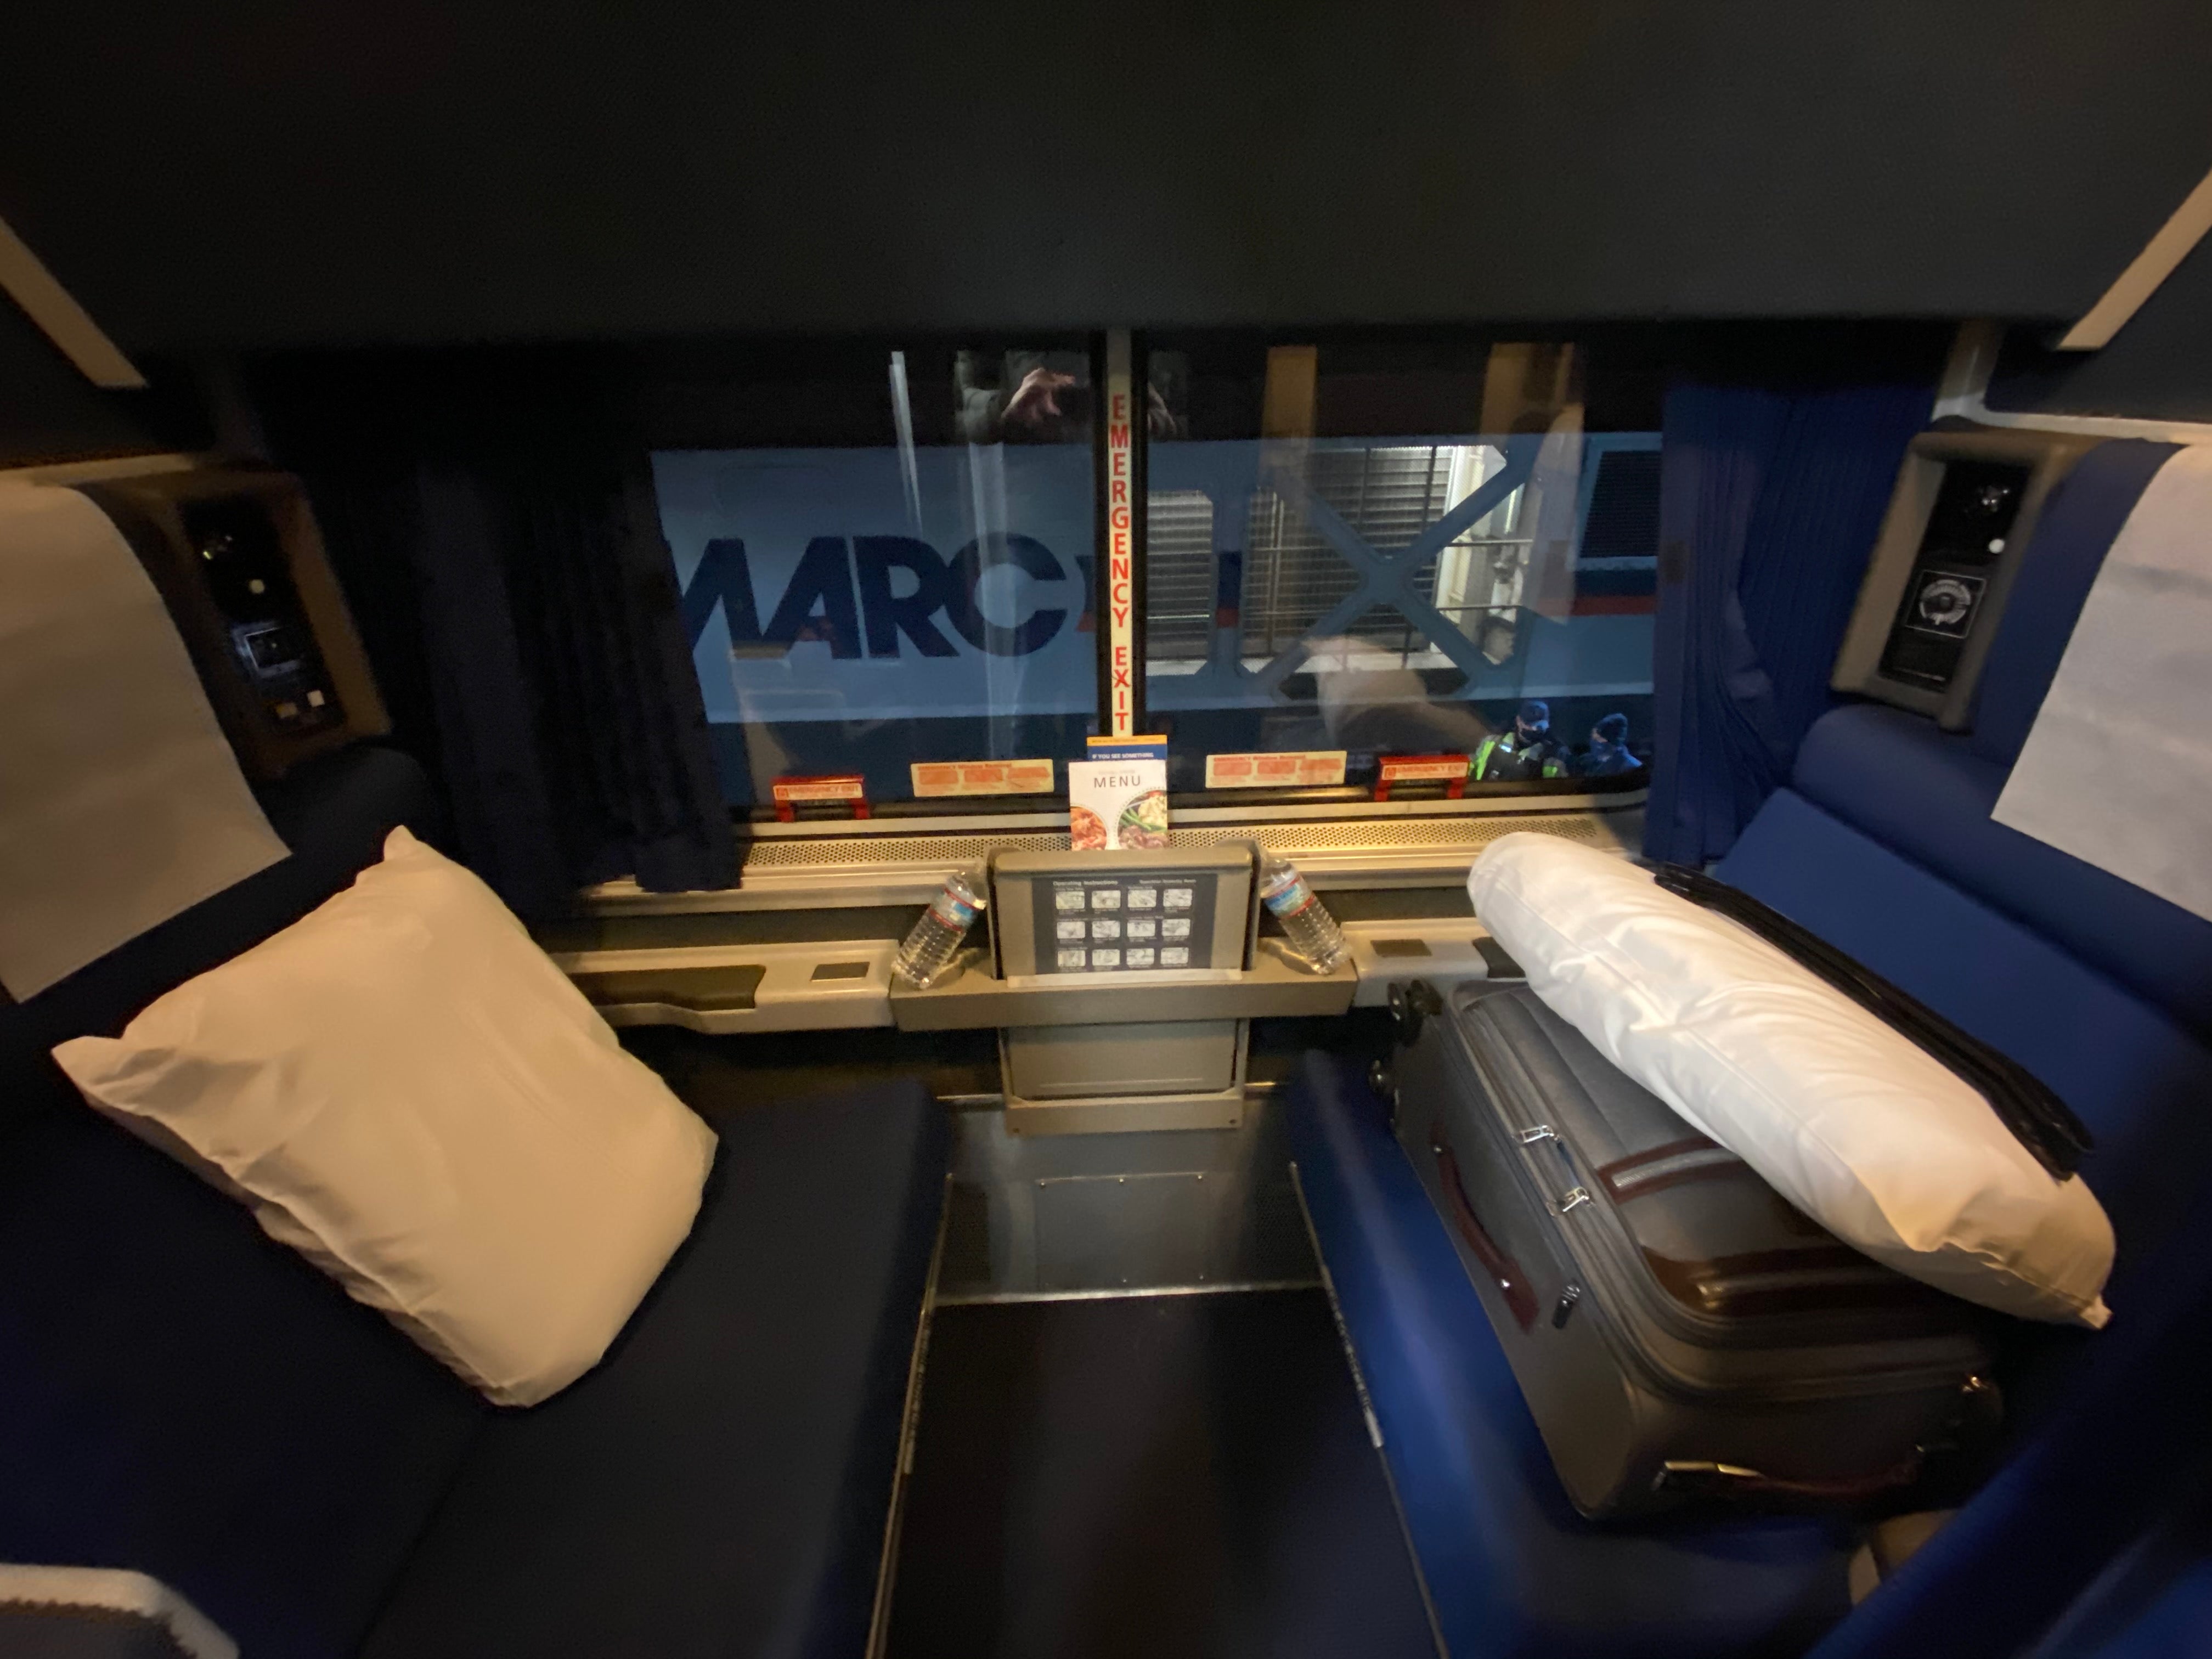 The service for roomette passengers is like a first-class flight cabin